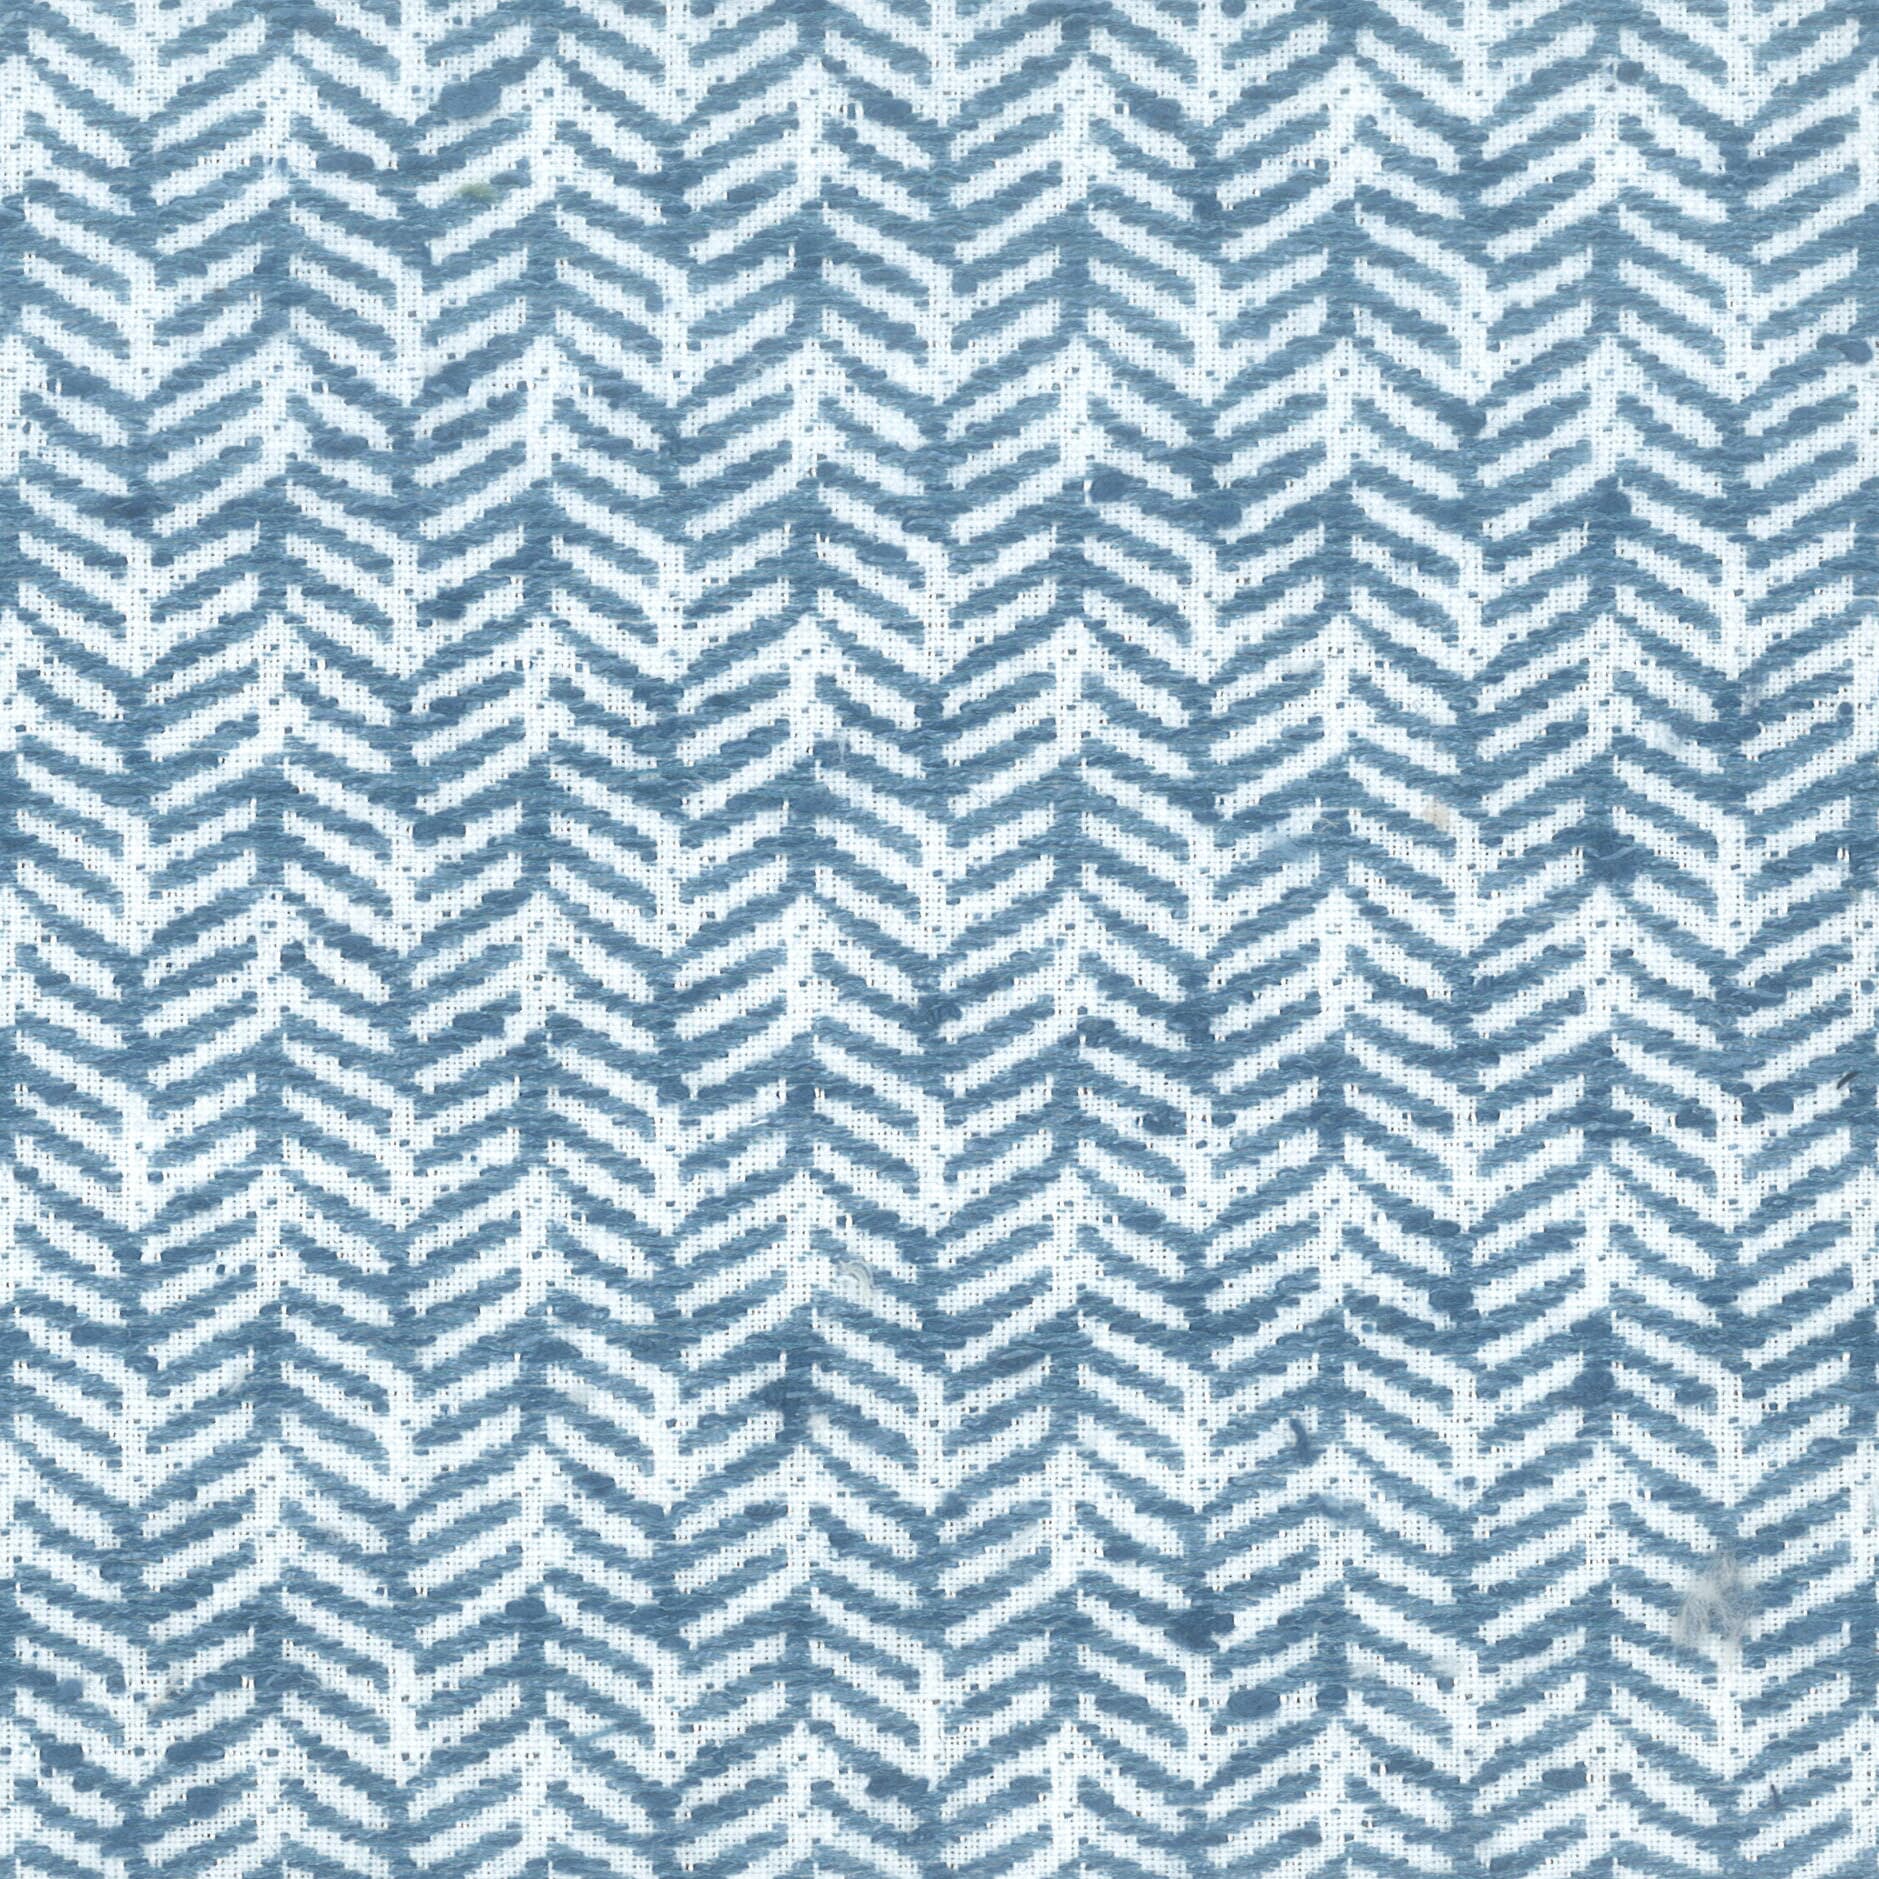 Tipsey 1 Blue/white by Stout Fabric